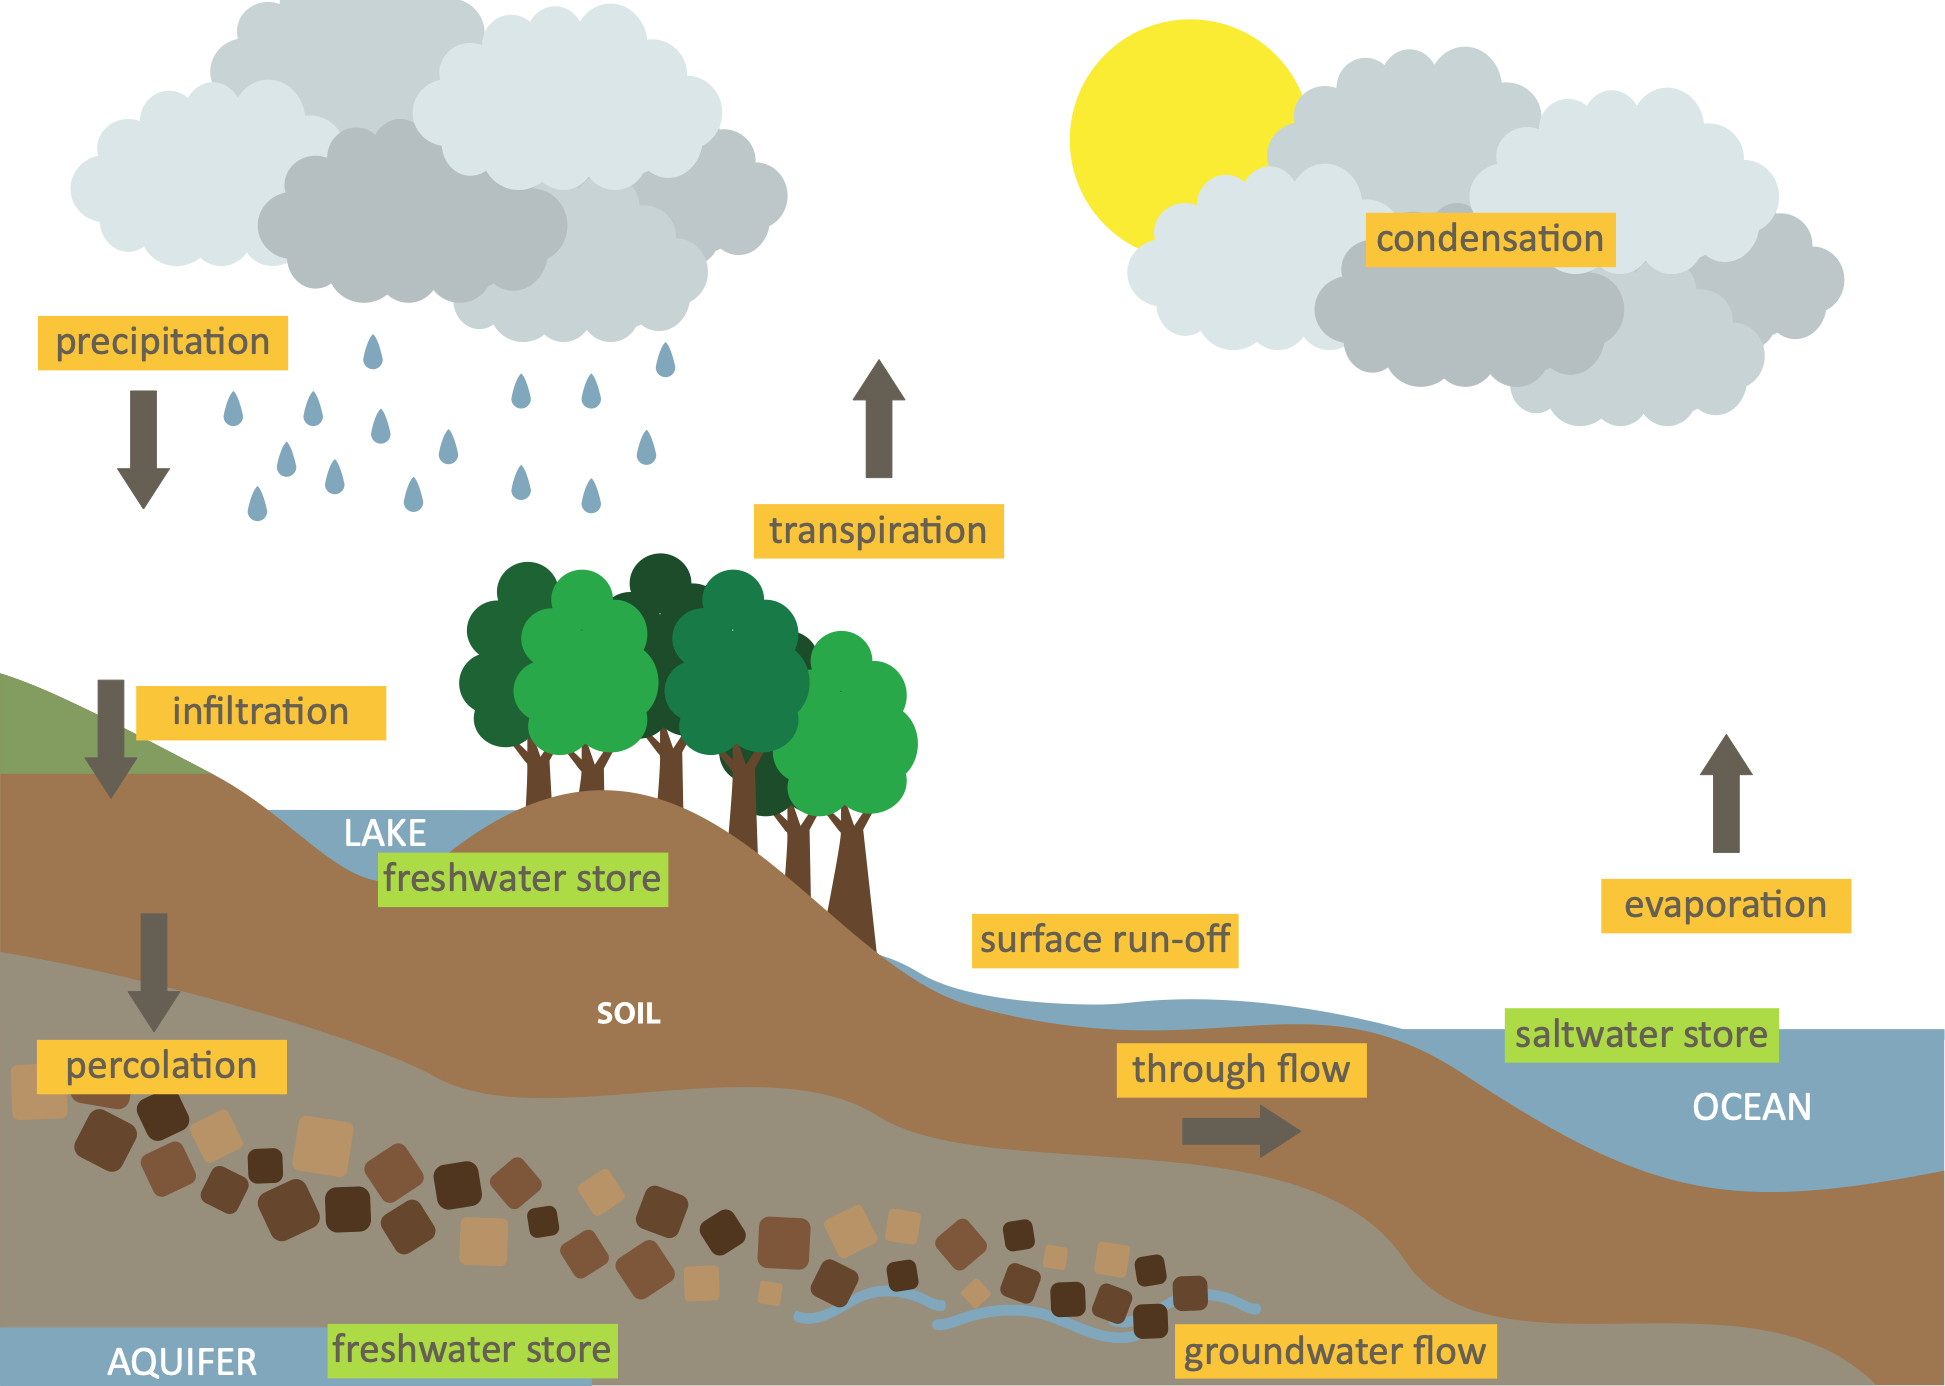 The Hydrological Cycle